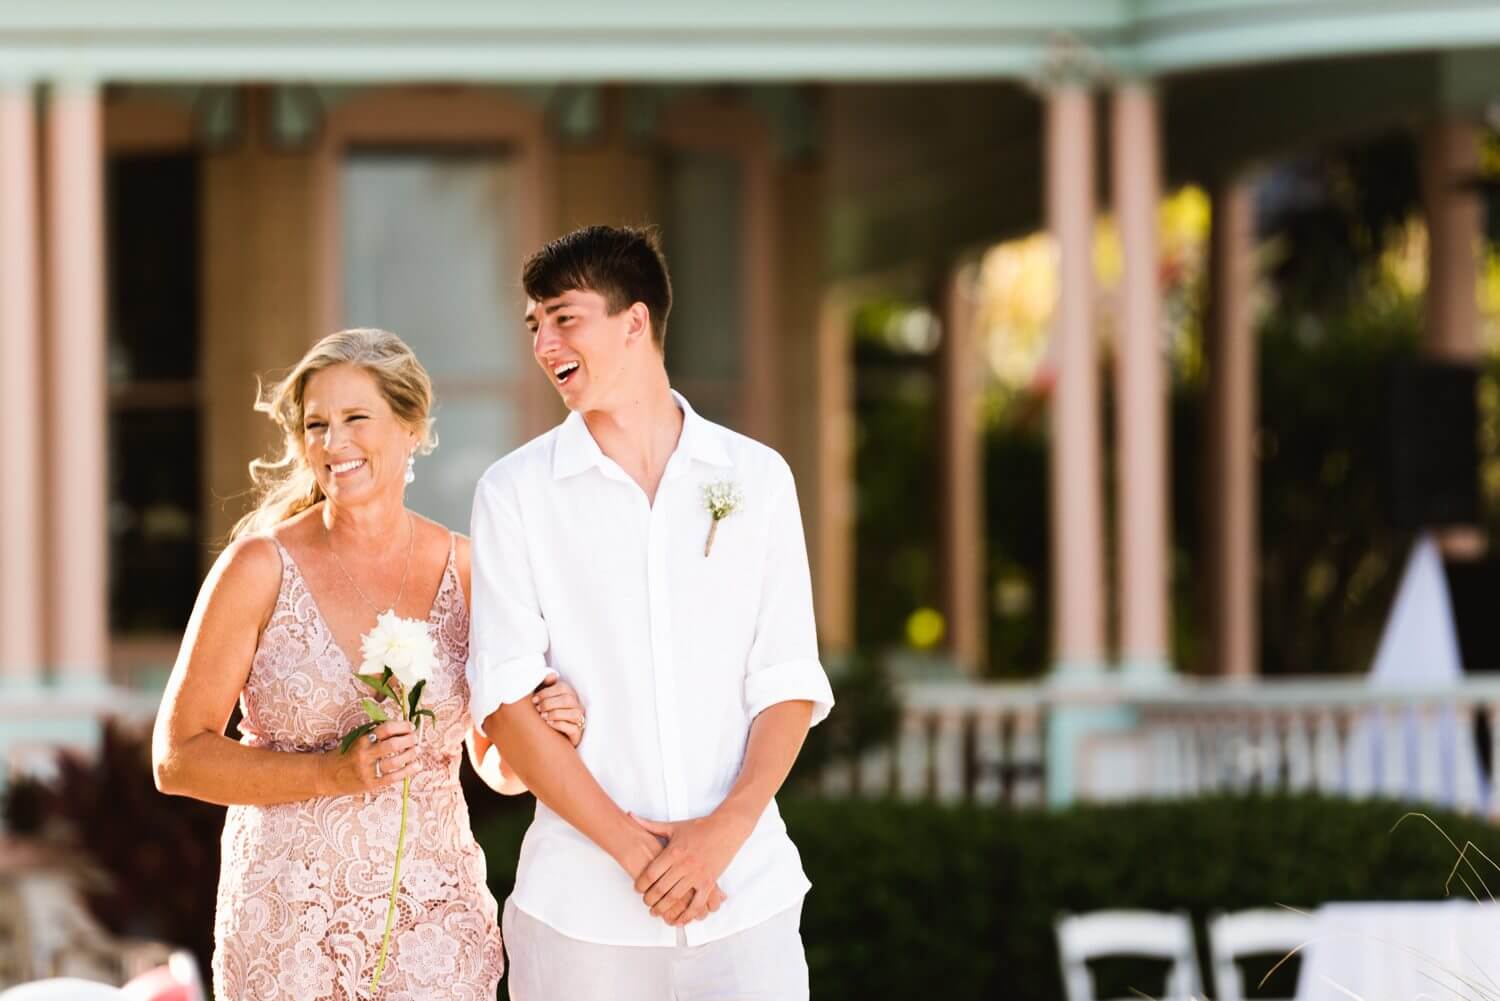 A bride and groom walking down the aisle at a southernmost mansion wedding in Key West.